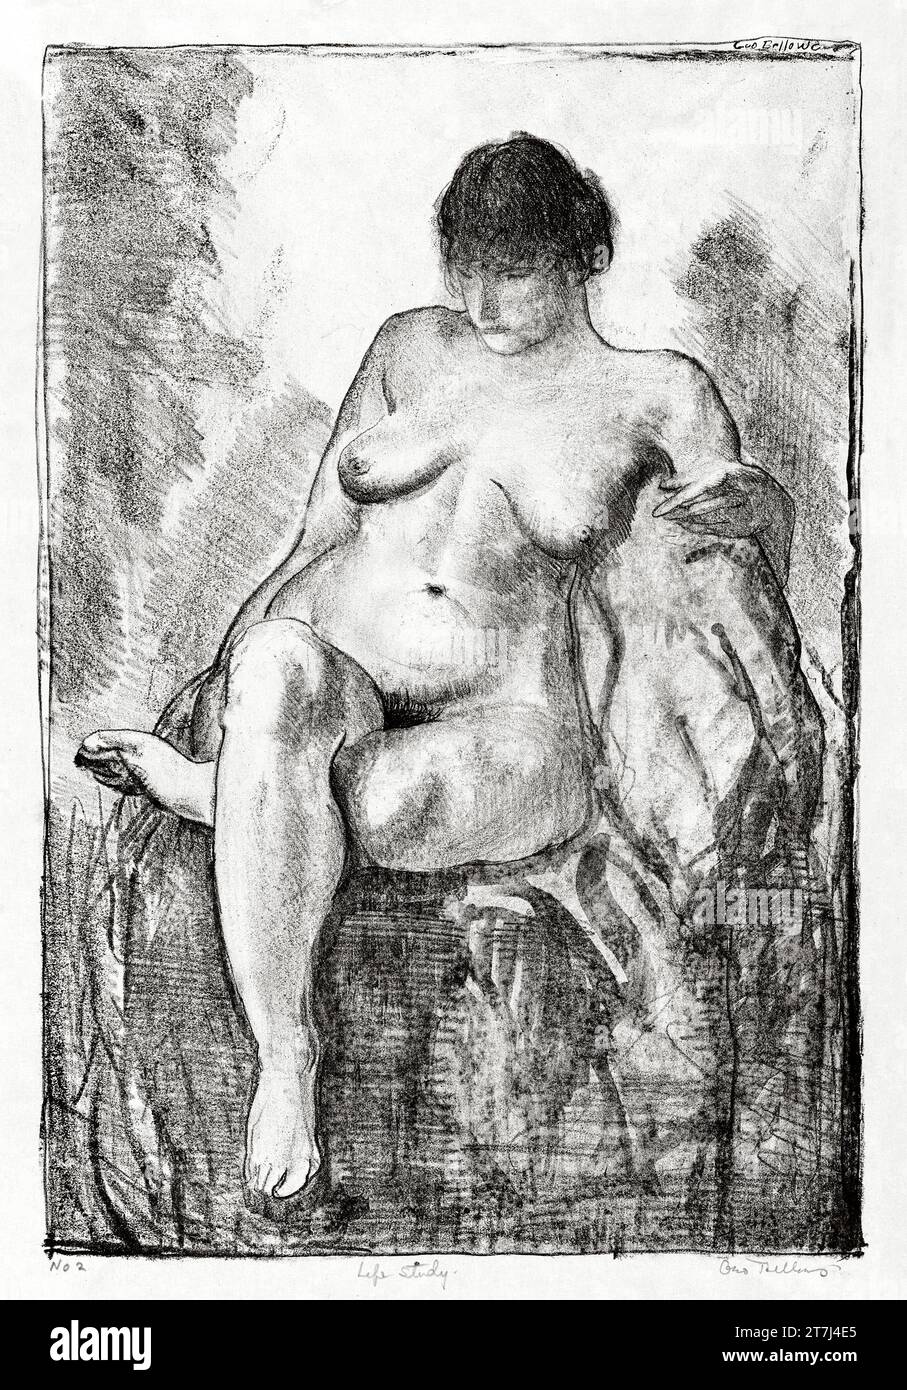 Nude woman seated print in high resolution by George Wesley Bellows. Original from the Boston Public Library. Stock Photo